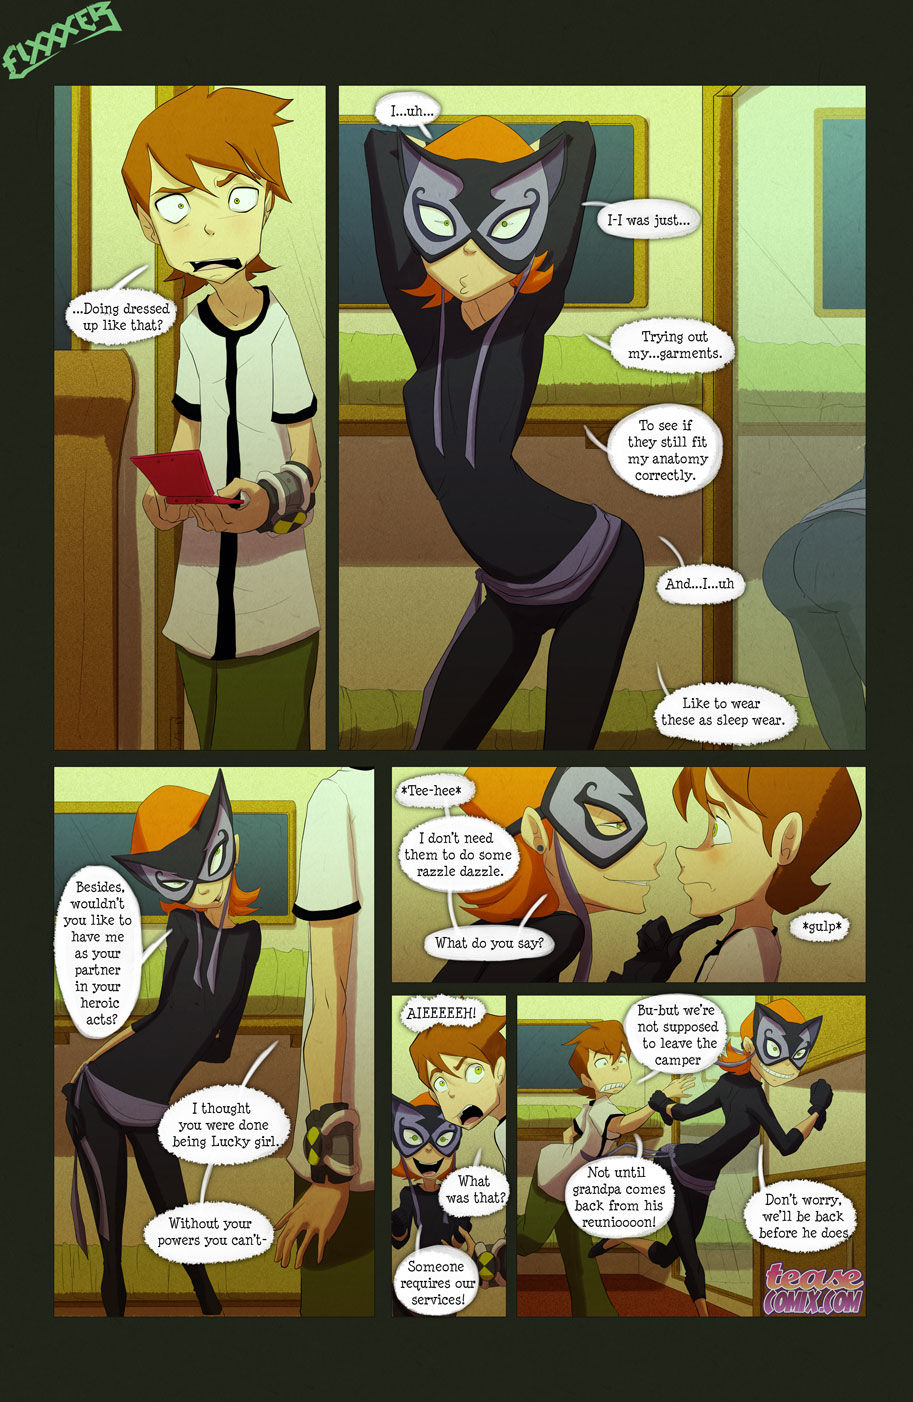 Fixxxer - The witch with no name, Ben 10 page 13